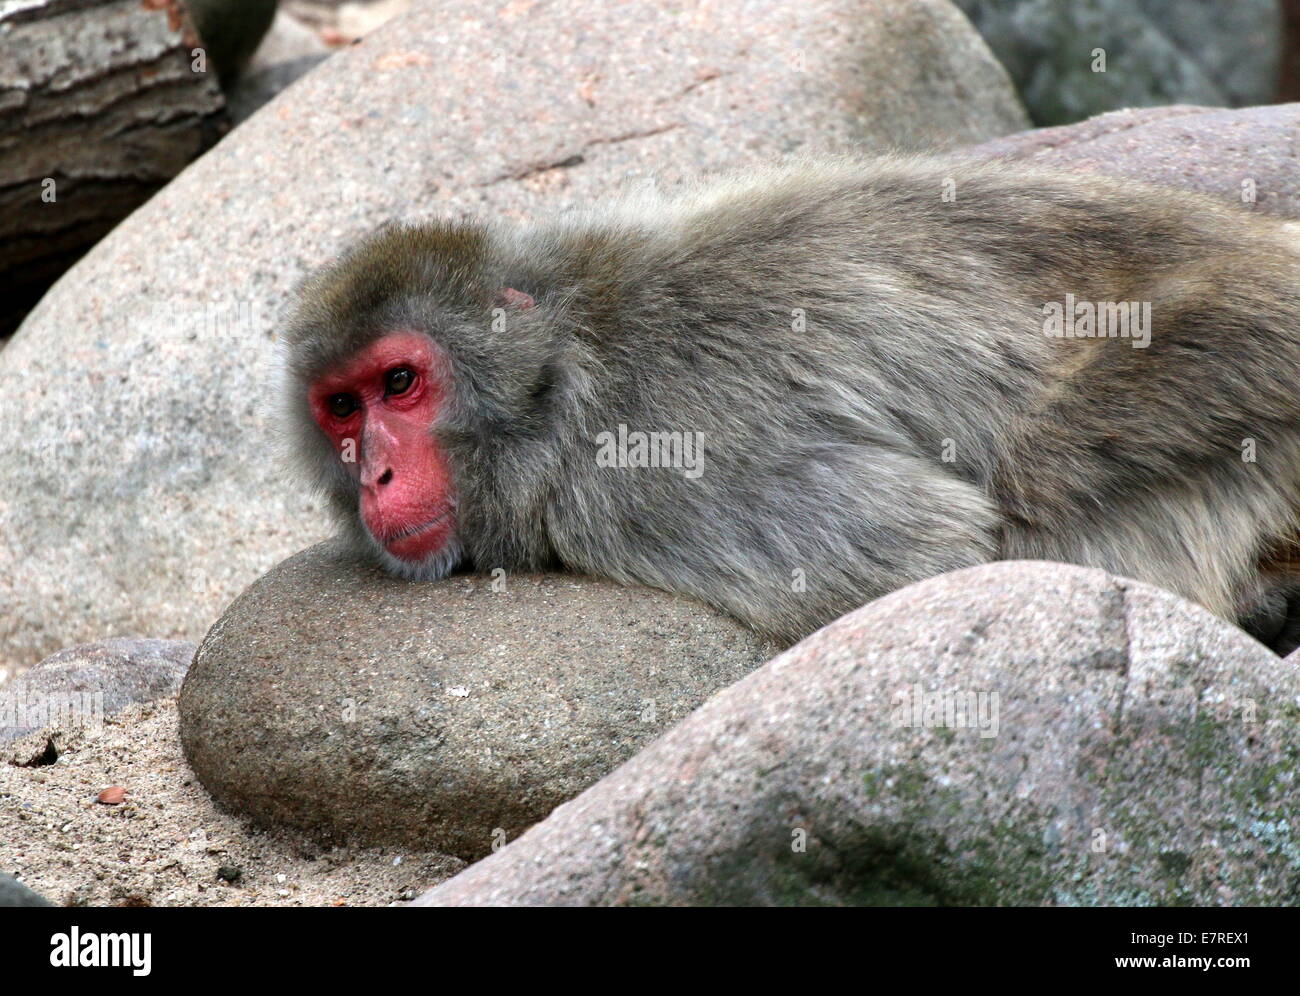 Japanese macaque or Snow monkey (Macaca fuscata) close-up, lying on rocks Stock Photo